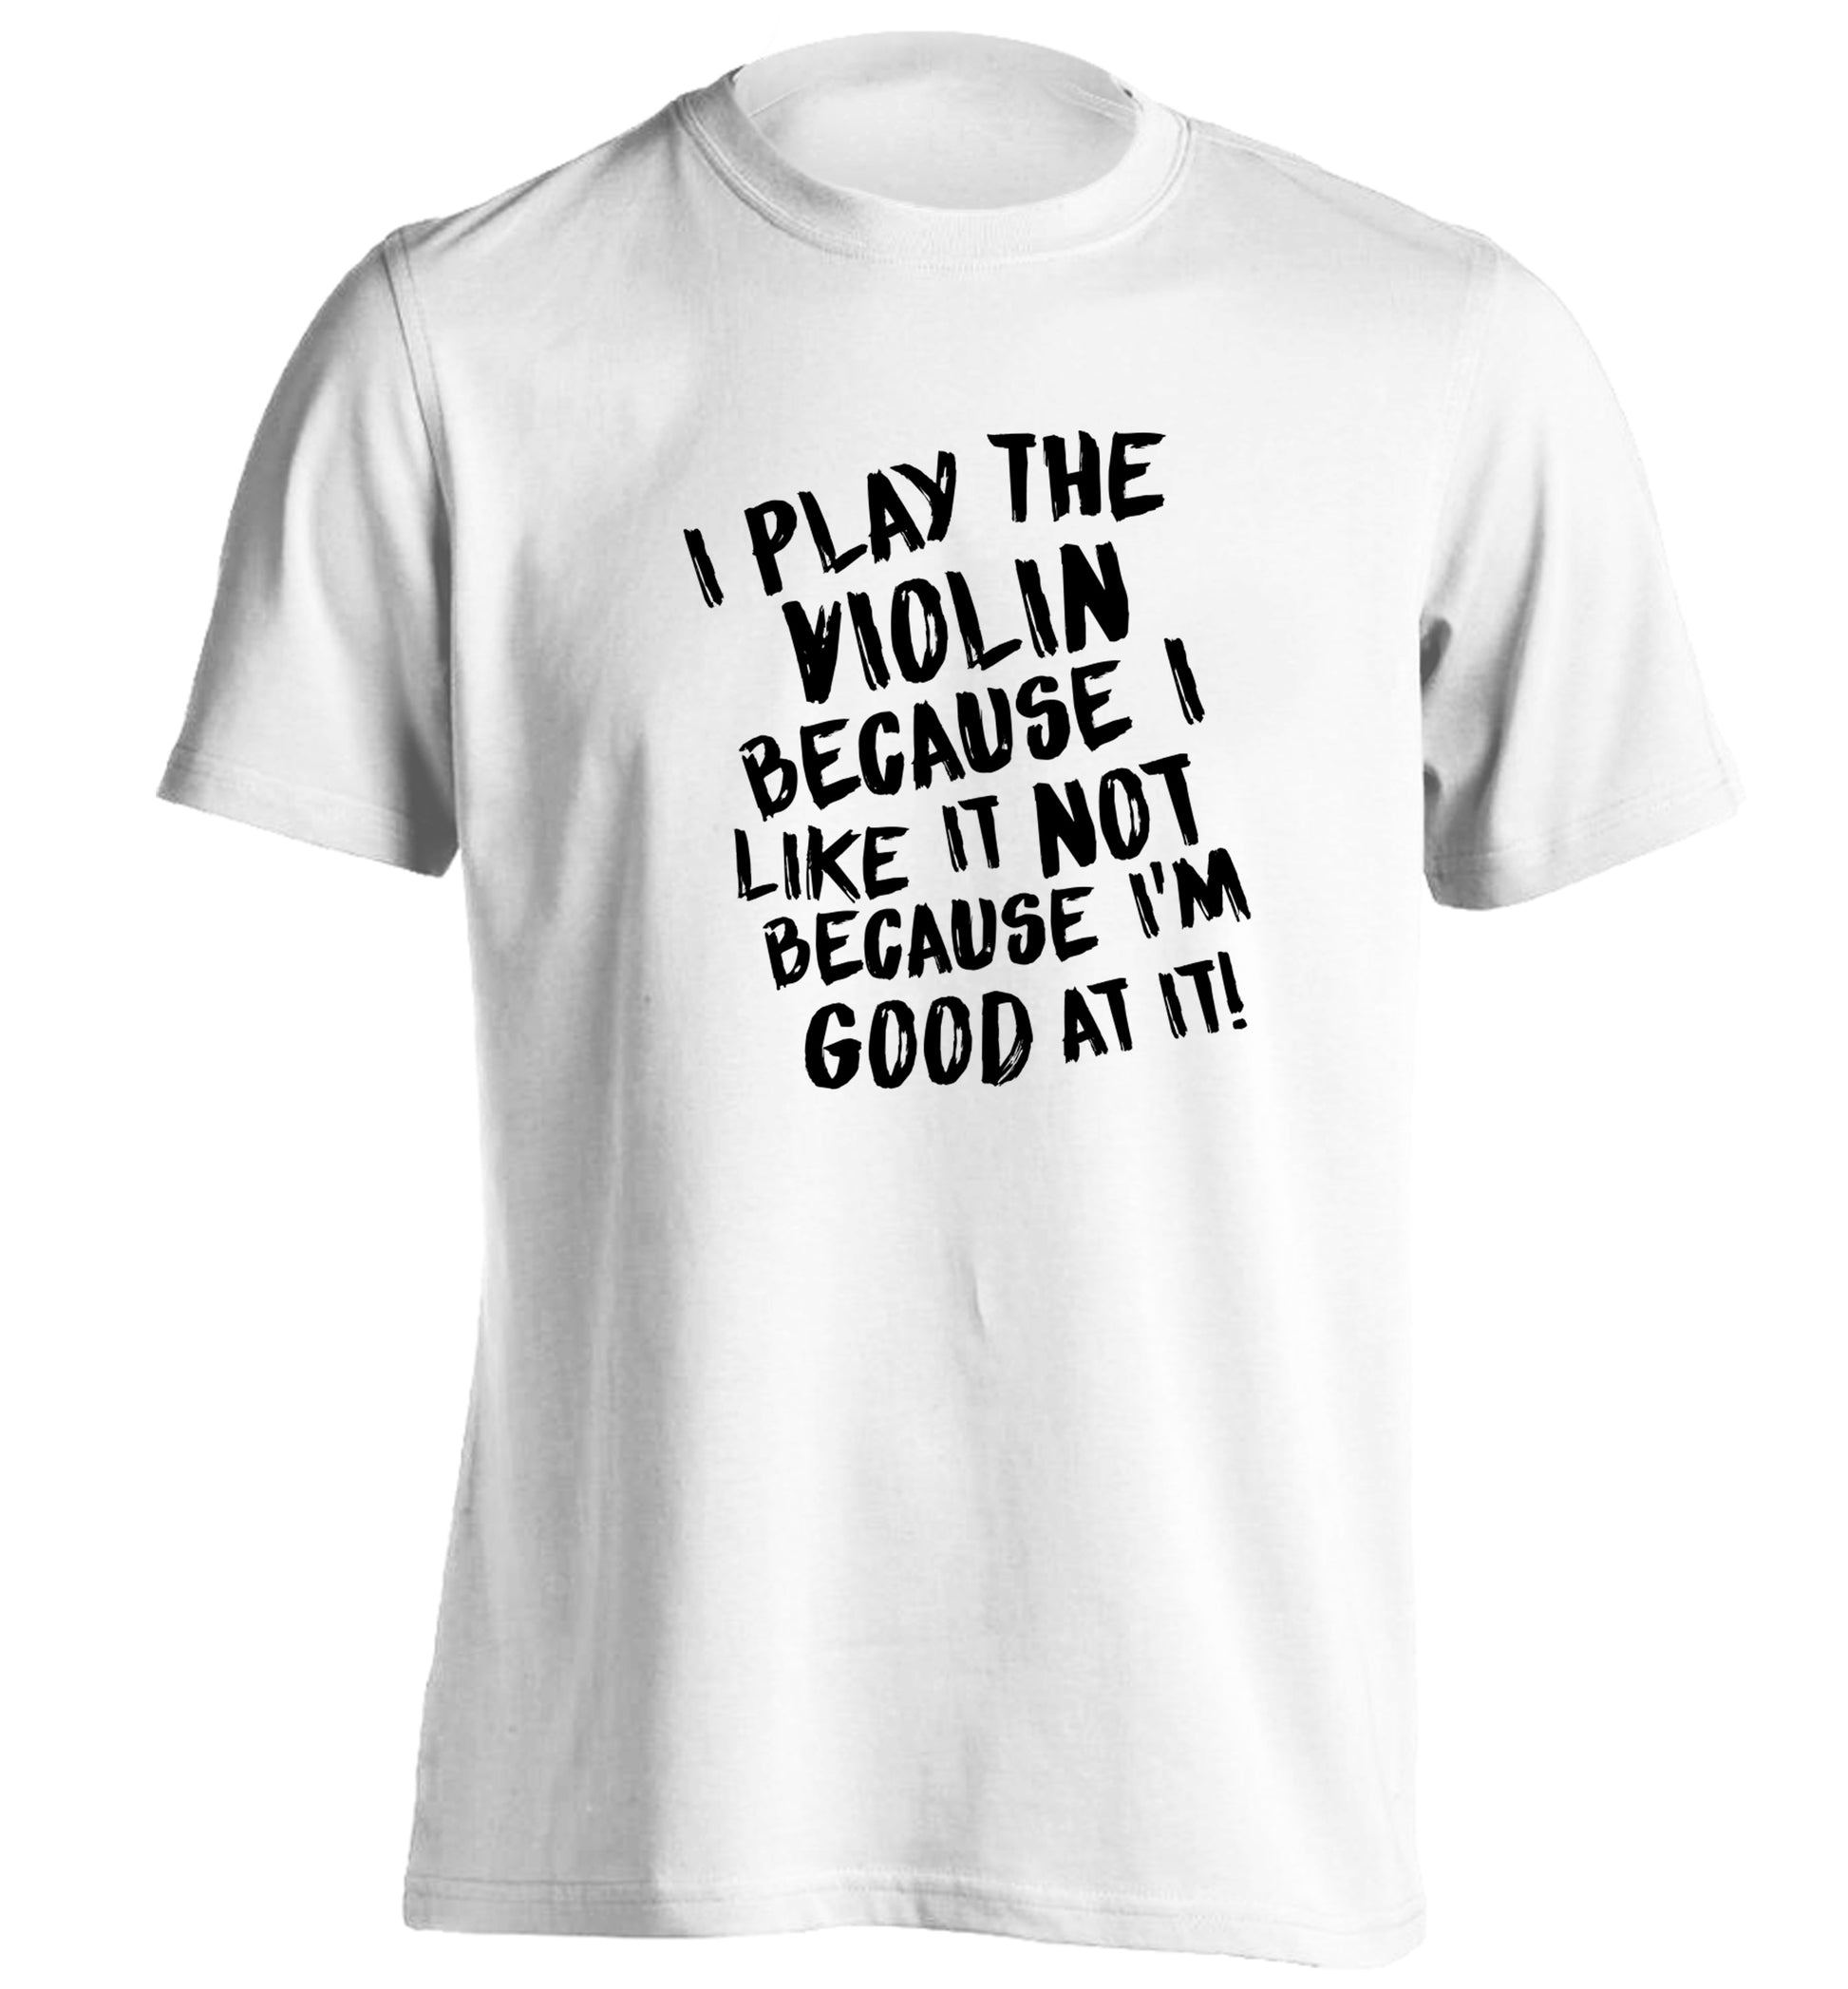 I play the violin because I like it not because I'm good at it adults unisex white Tshirt 2XL